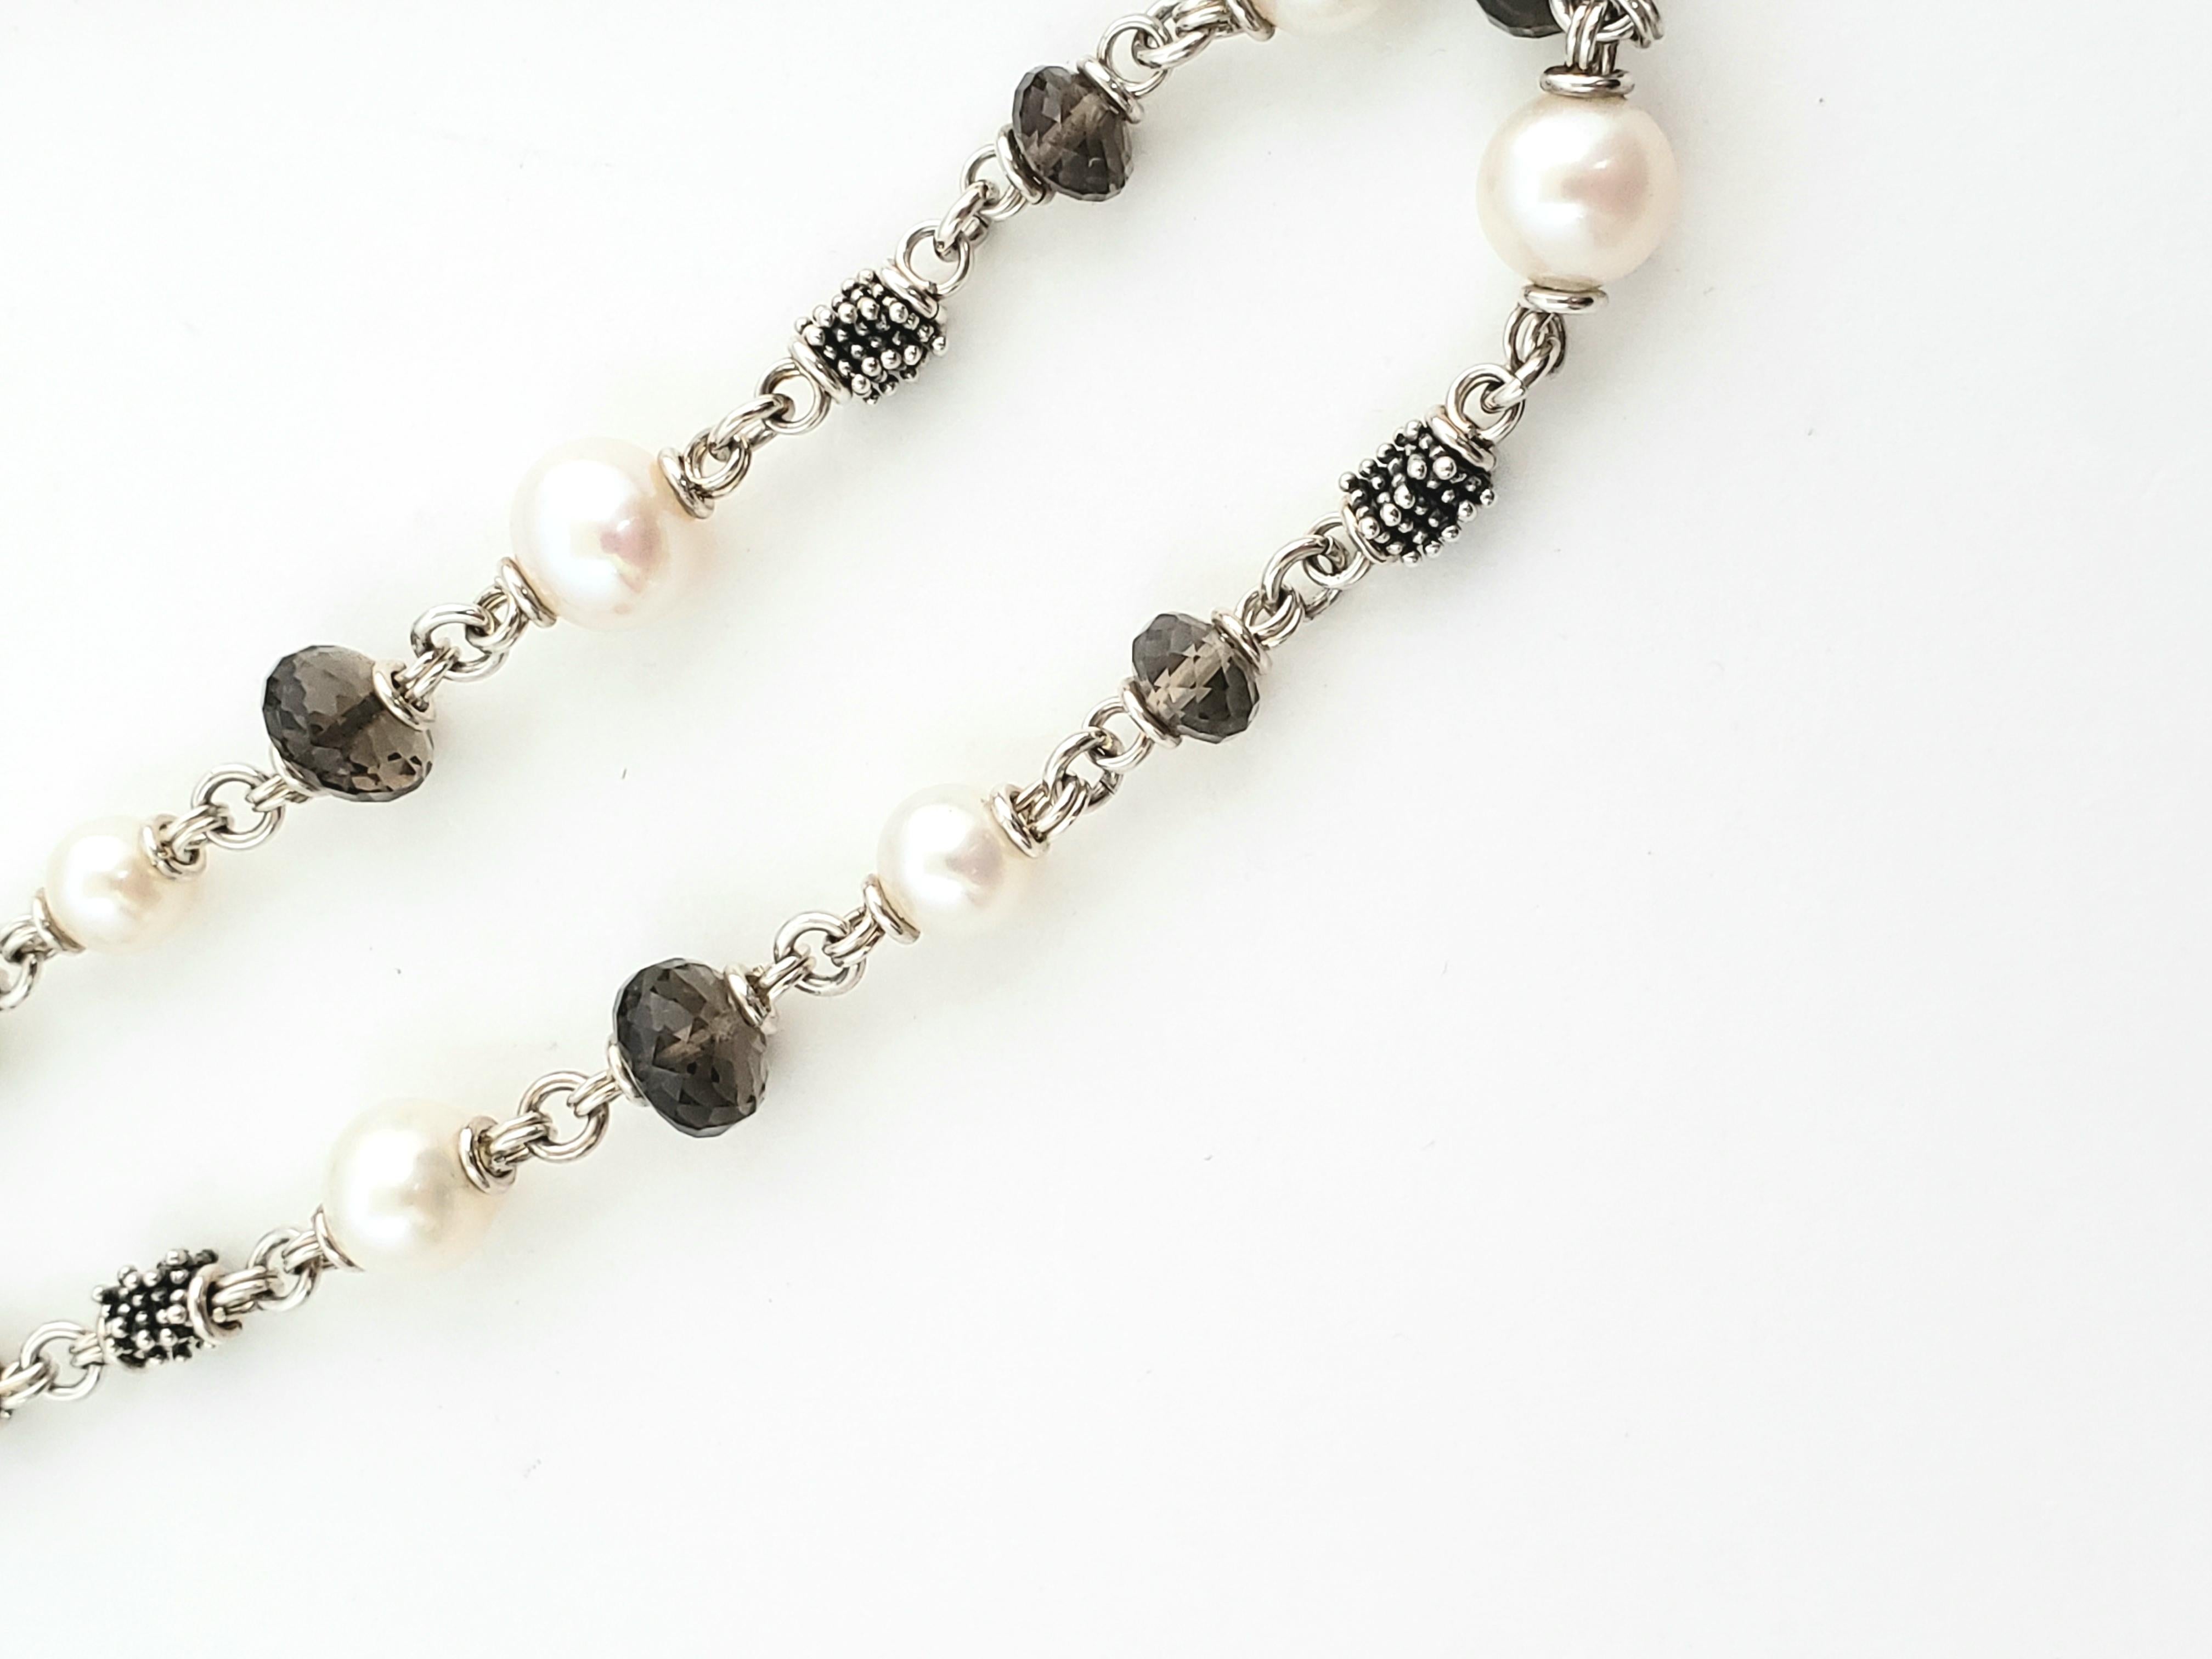 Michael Dawkins Sterling Silver Pearls and Smokey Topaz Necklace

This is a beautiful and authentic Michael Dawkins silver necklace with pearls and smokey topaz quartz rondelles. 

Measurements:  36 inches length.  Pearls 8.5mm.  Topaz 6mm.

Weight: